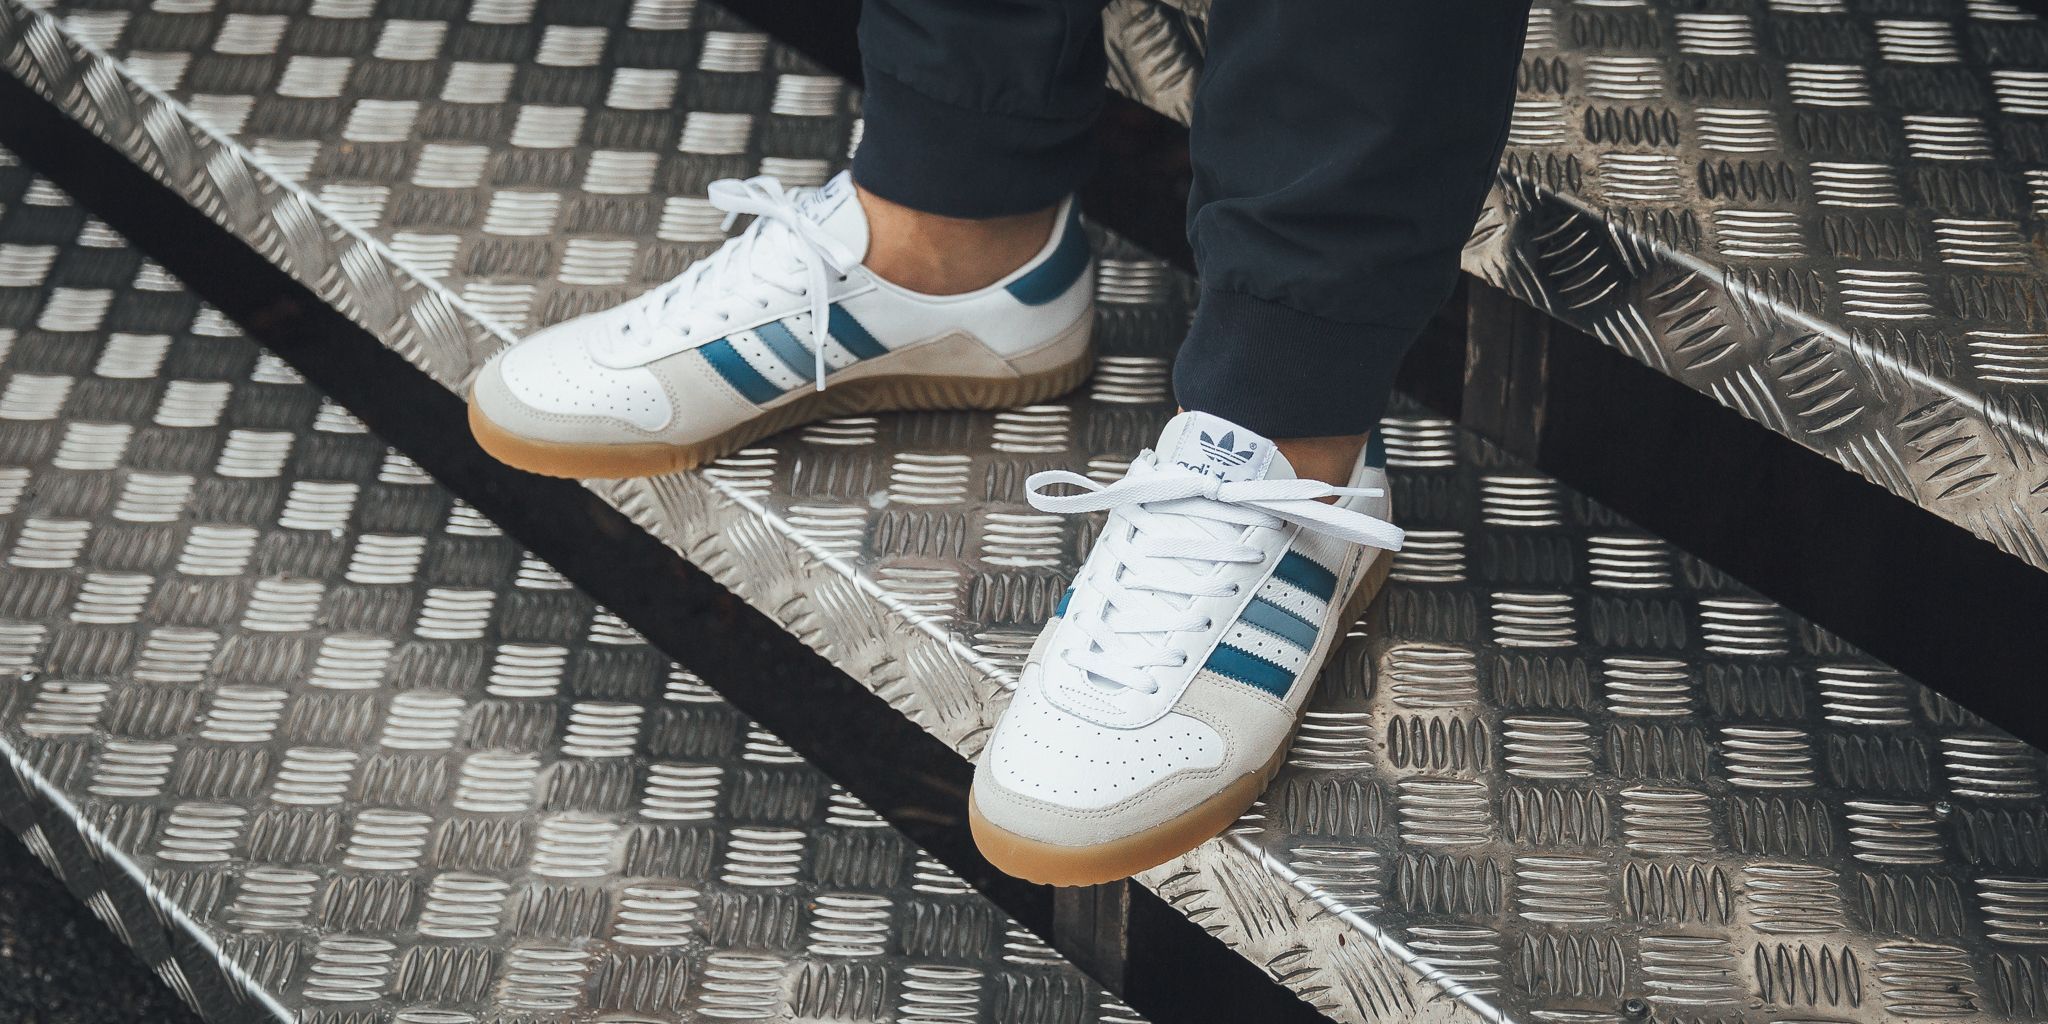 Titolo on Twitter: "O U T 🔥 O W ❗️ Adidas Indoor Comp Spzl 🔹 Footwear White/Supplier Colour/Clear Brown s h o p ➡️ https://t.co/FpQeeMVMgn #adidas #adidasspezial #spezial #spzl #acidhouse #